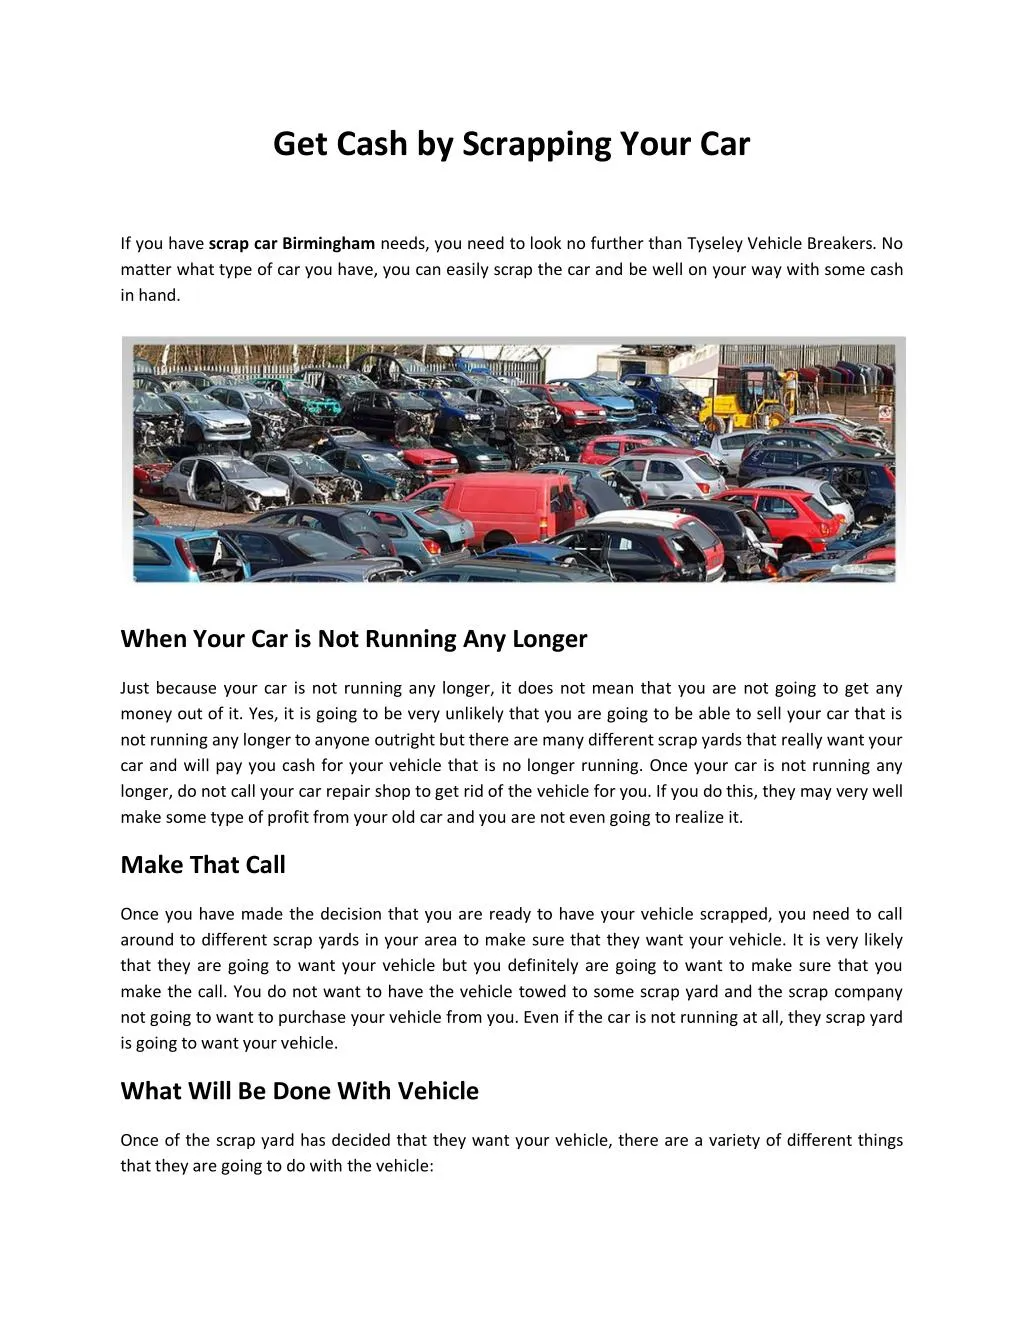 get cash by scrapping your car